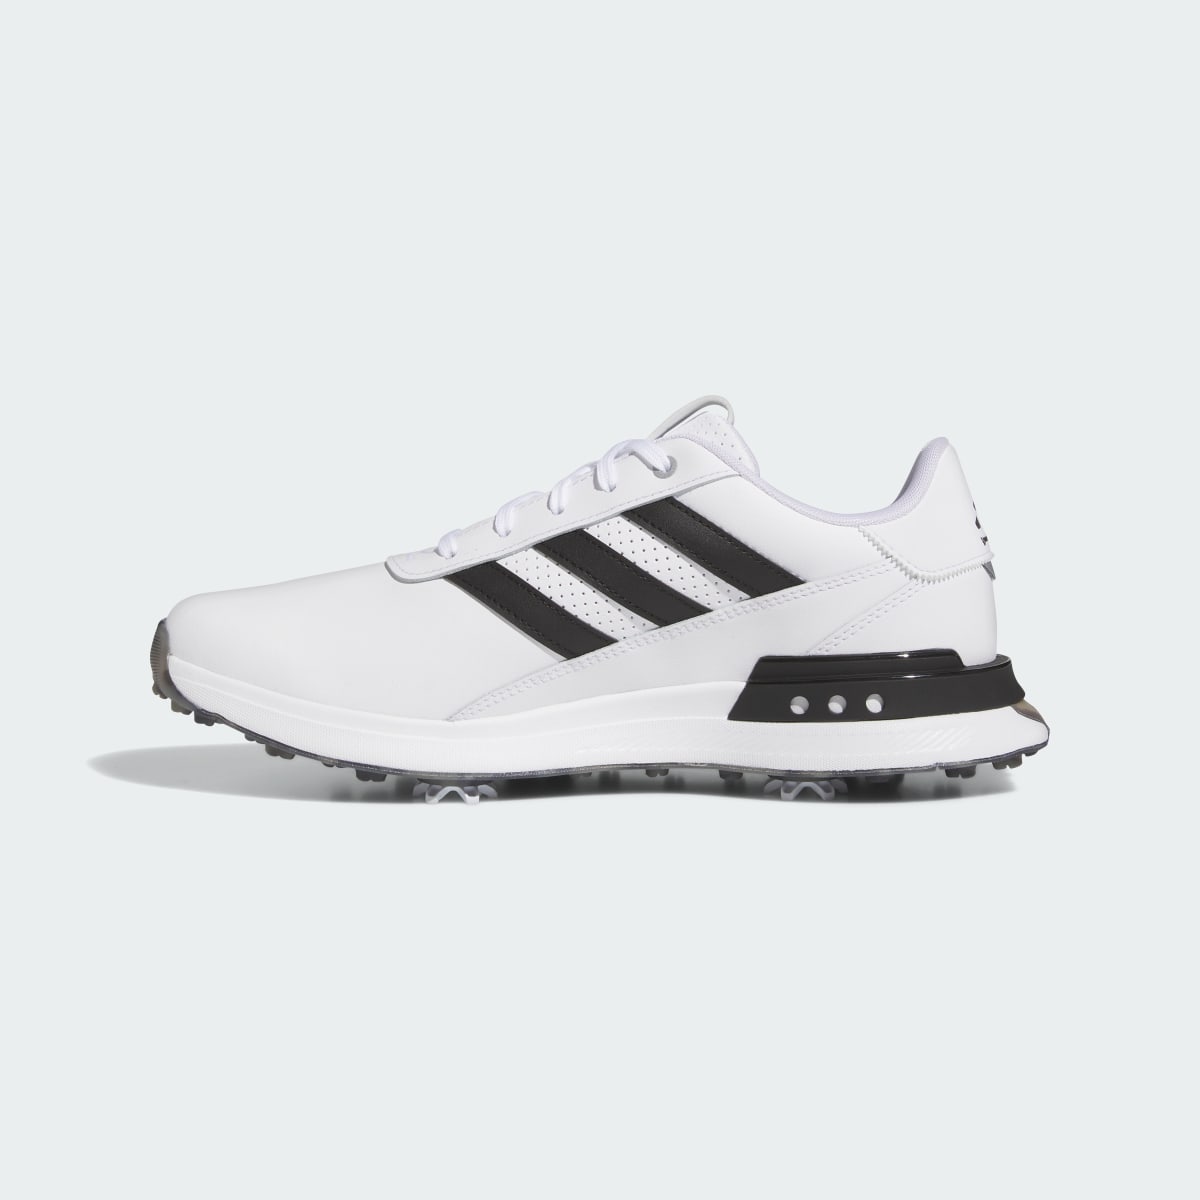 Adidas S2G 24 Golf Shoes. 10